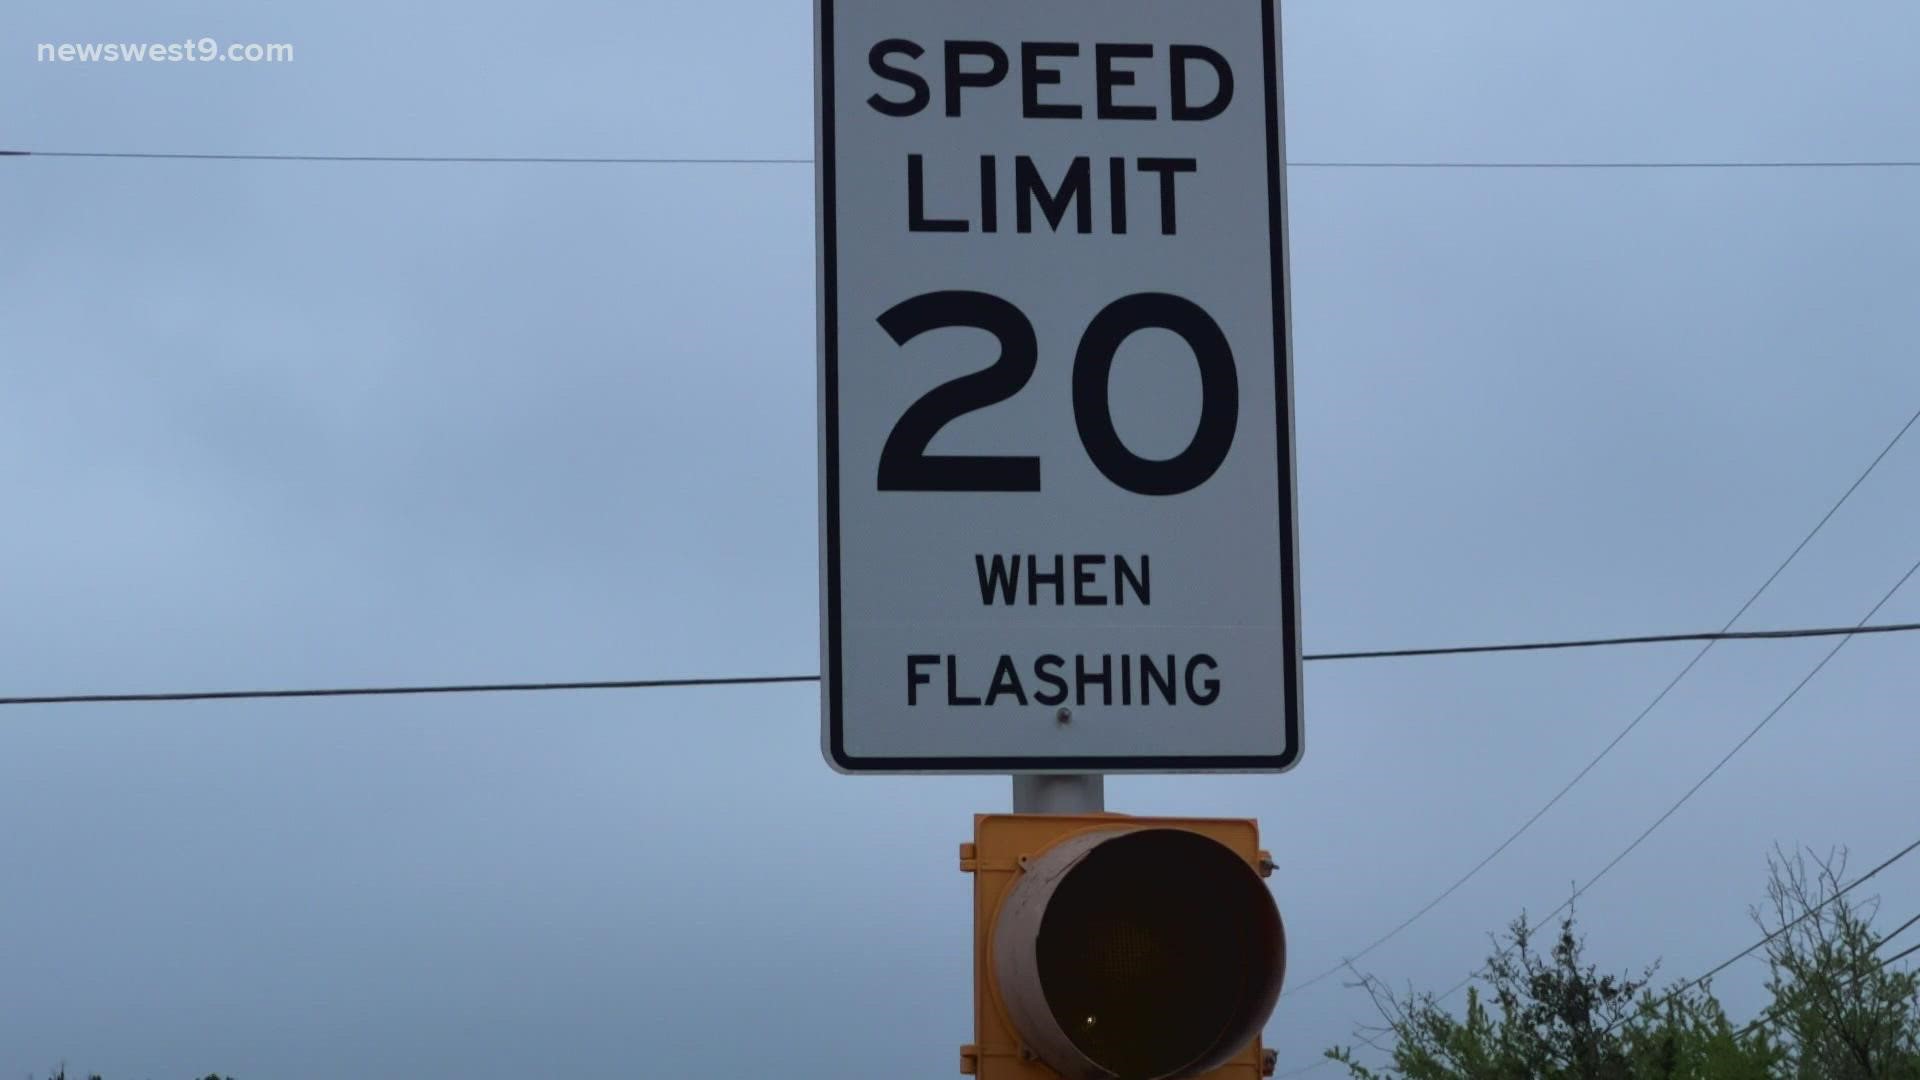 TxDOT and local law enforcement agencies will look to increase speed limit enforcement during this two week period.